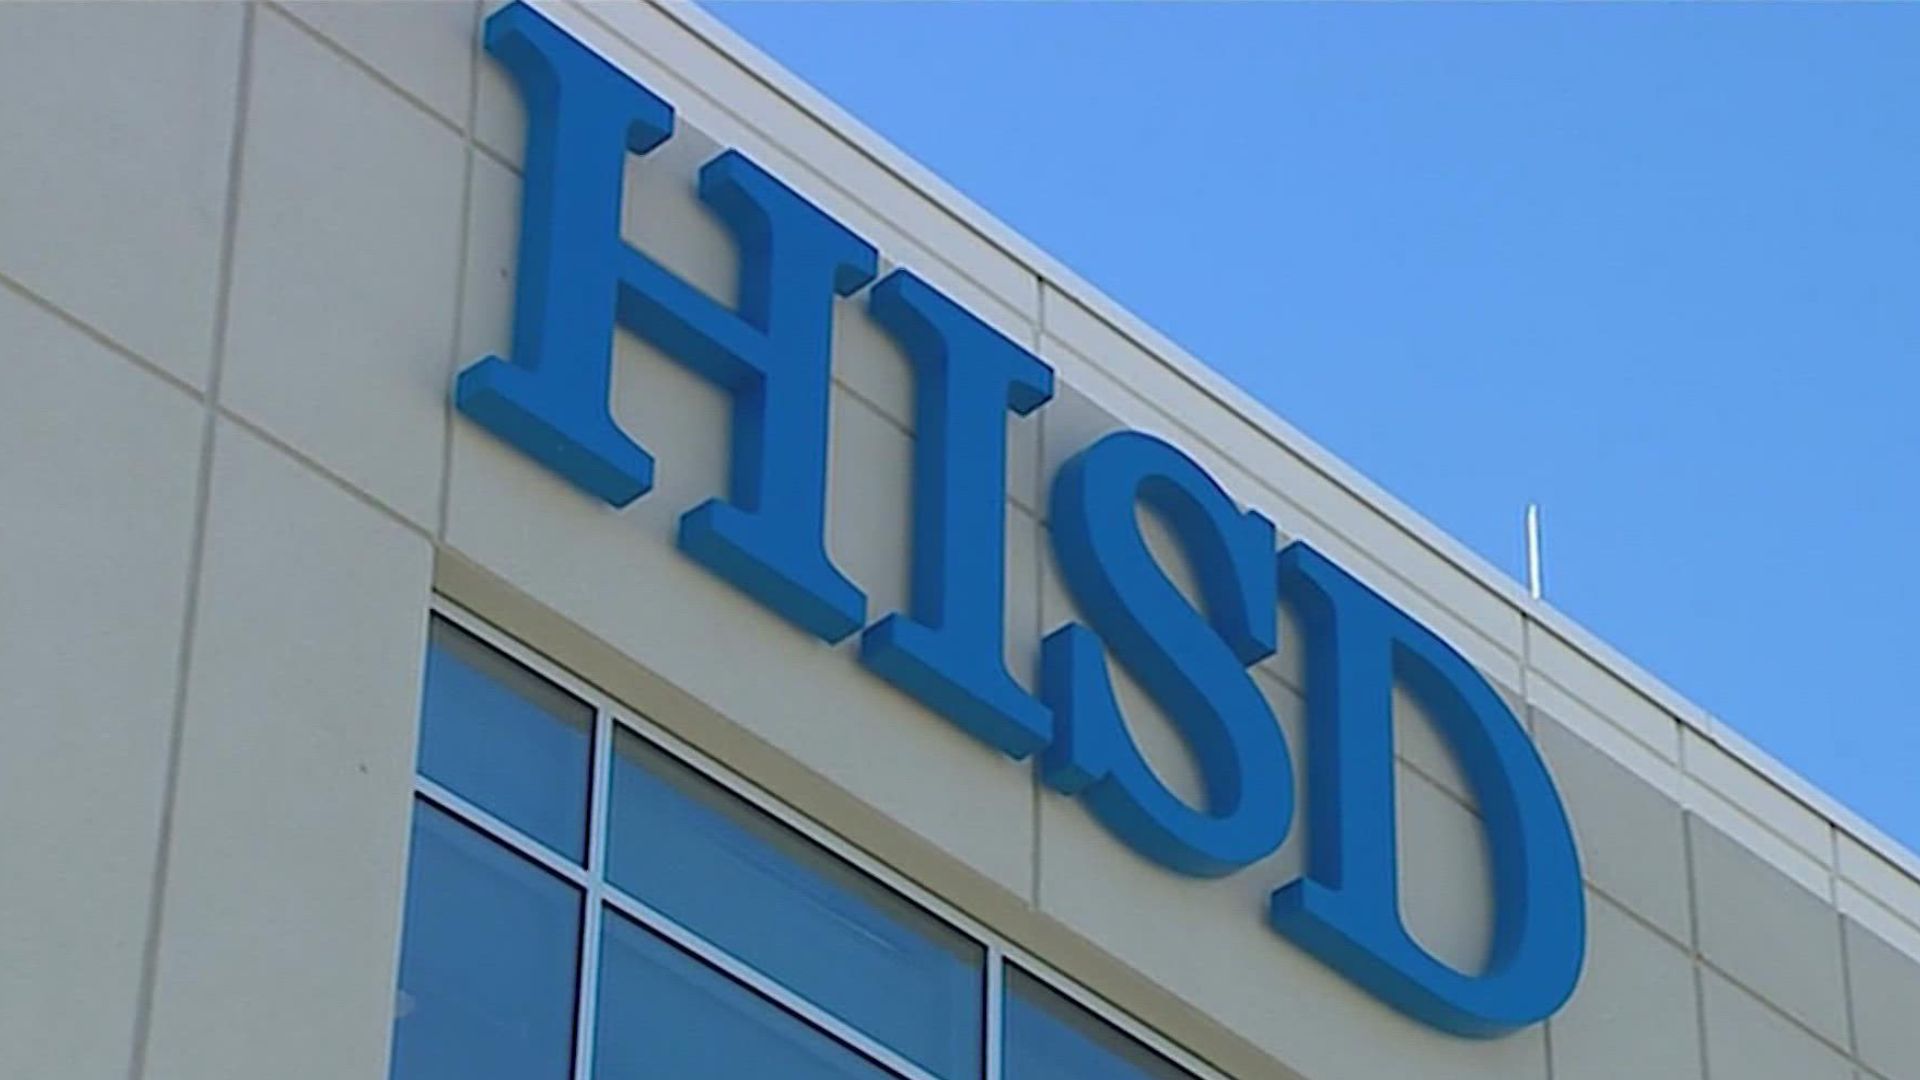 Houston’s teachers’ union is applauding a new proposed mask mandate for HISD. It would cover students, staff, and visitors at all schools, buses, and facilities.